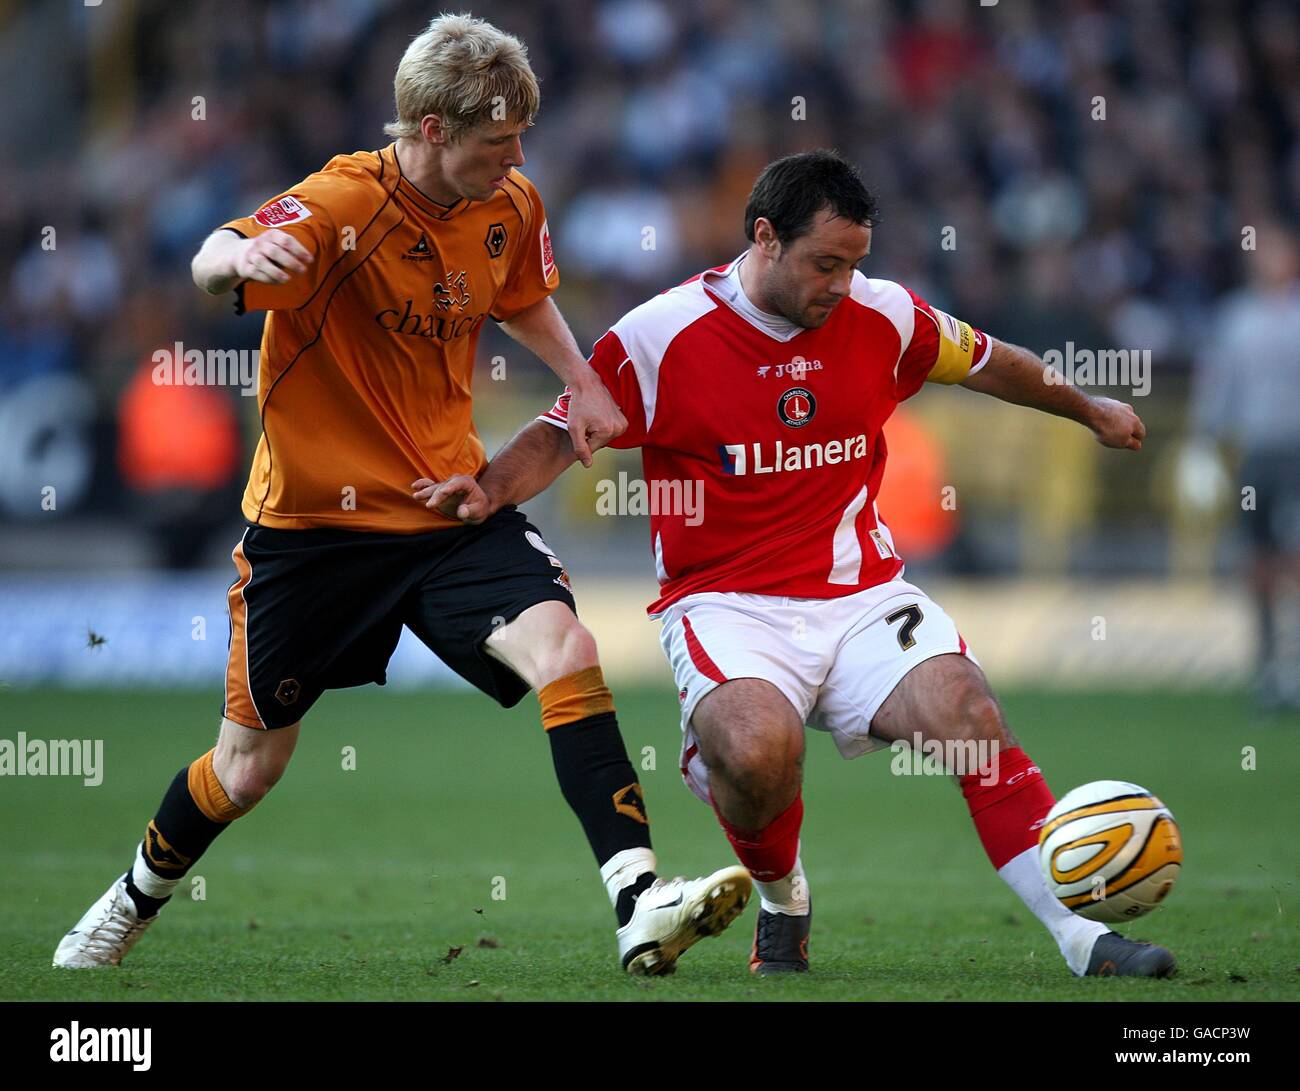 Soccer - Coca-Cola Football League Championship - Wolverhampton Wanderers v Charlton Athletic - Molineux Stadium. Wolverhampton Wanderers' Andrew Keogh (l) and Charlton Athletic's Andy Reid (r) battle for the ball Stock Photo